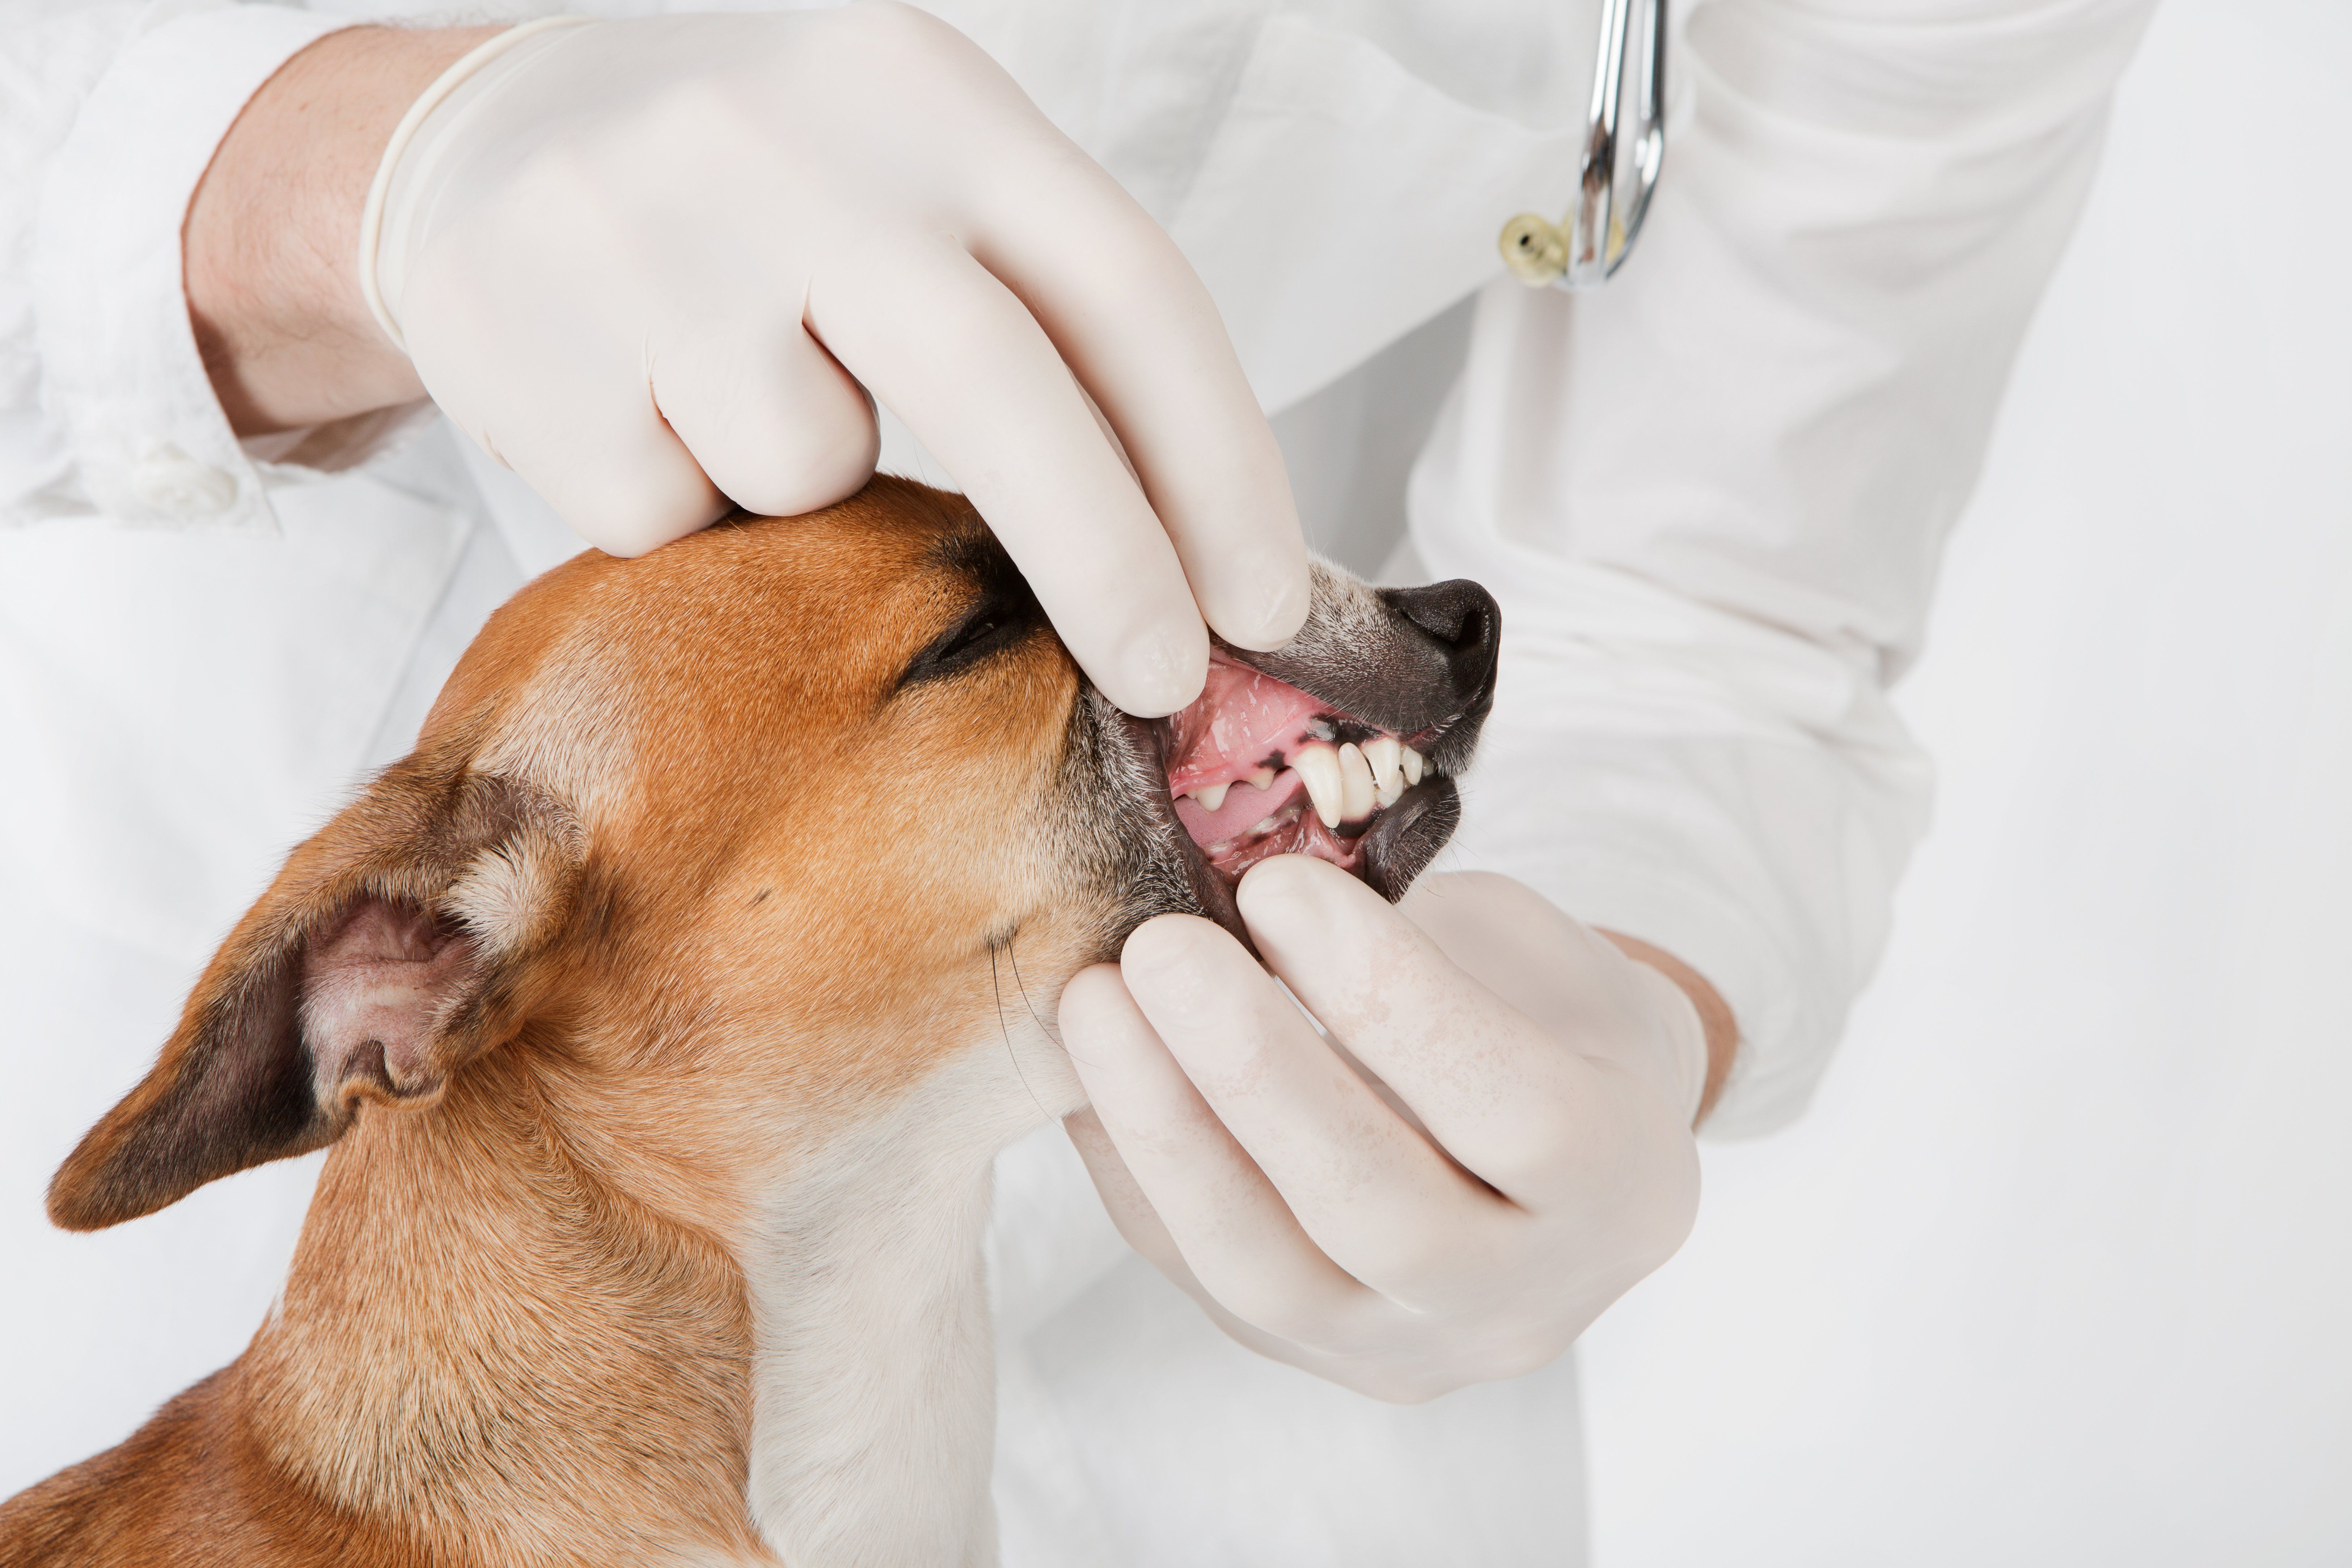 What Happens If Periodontal Disease Goes Untreated in Dogs?